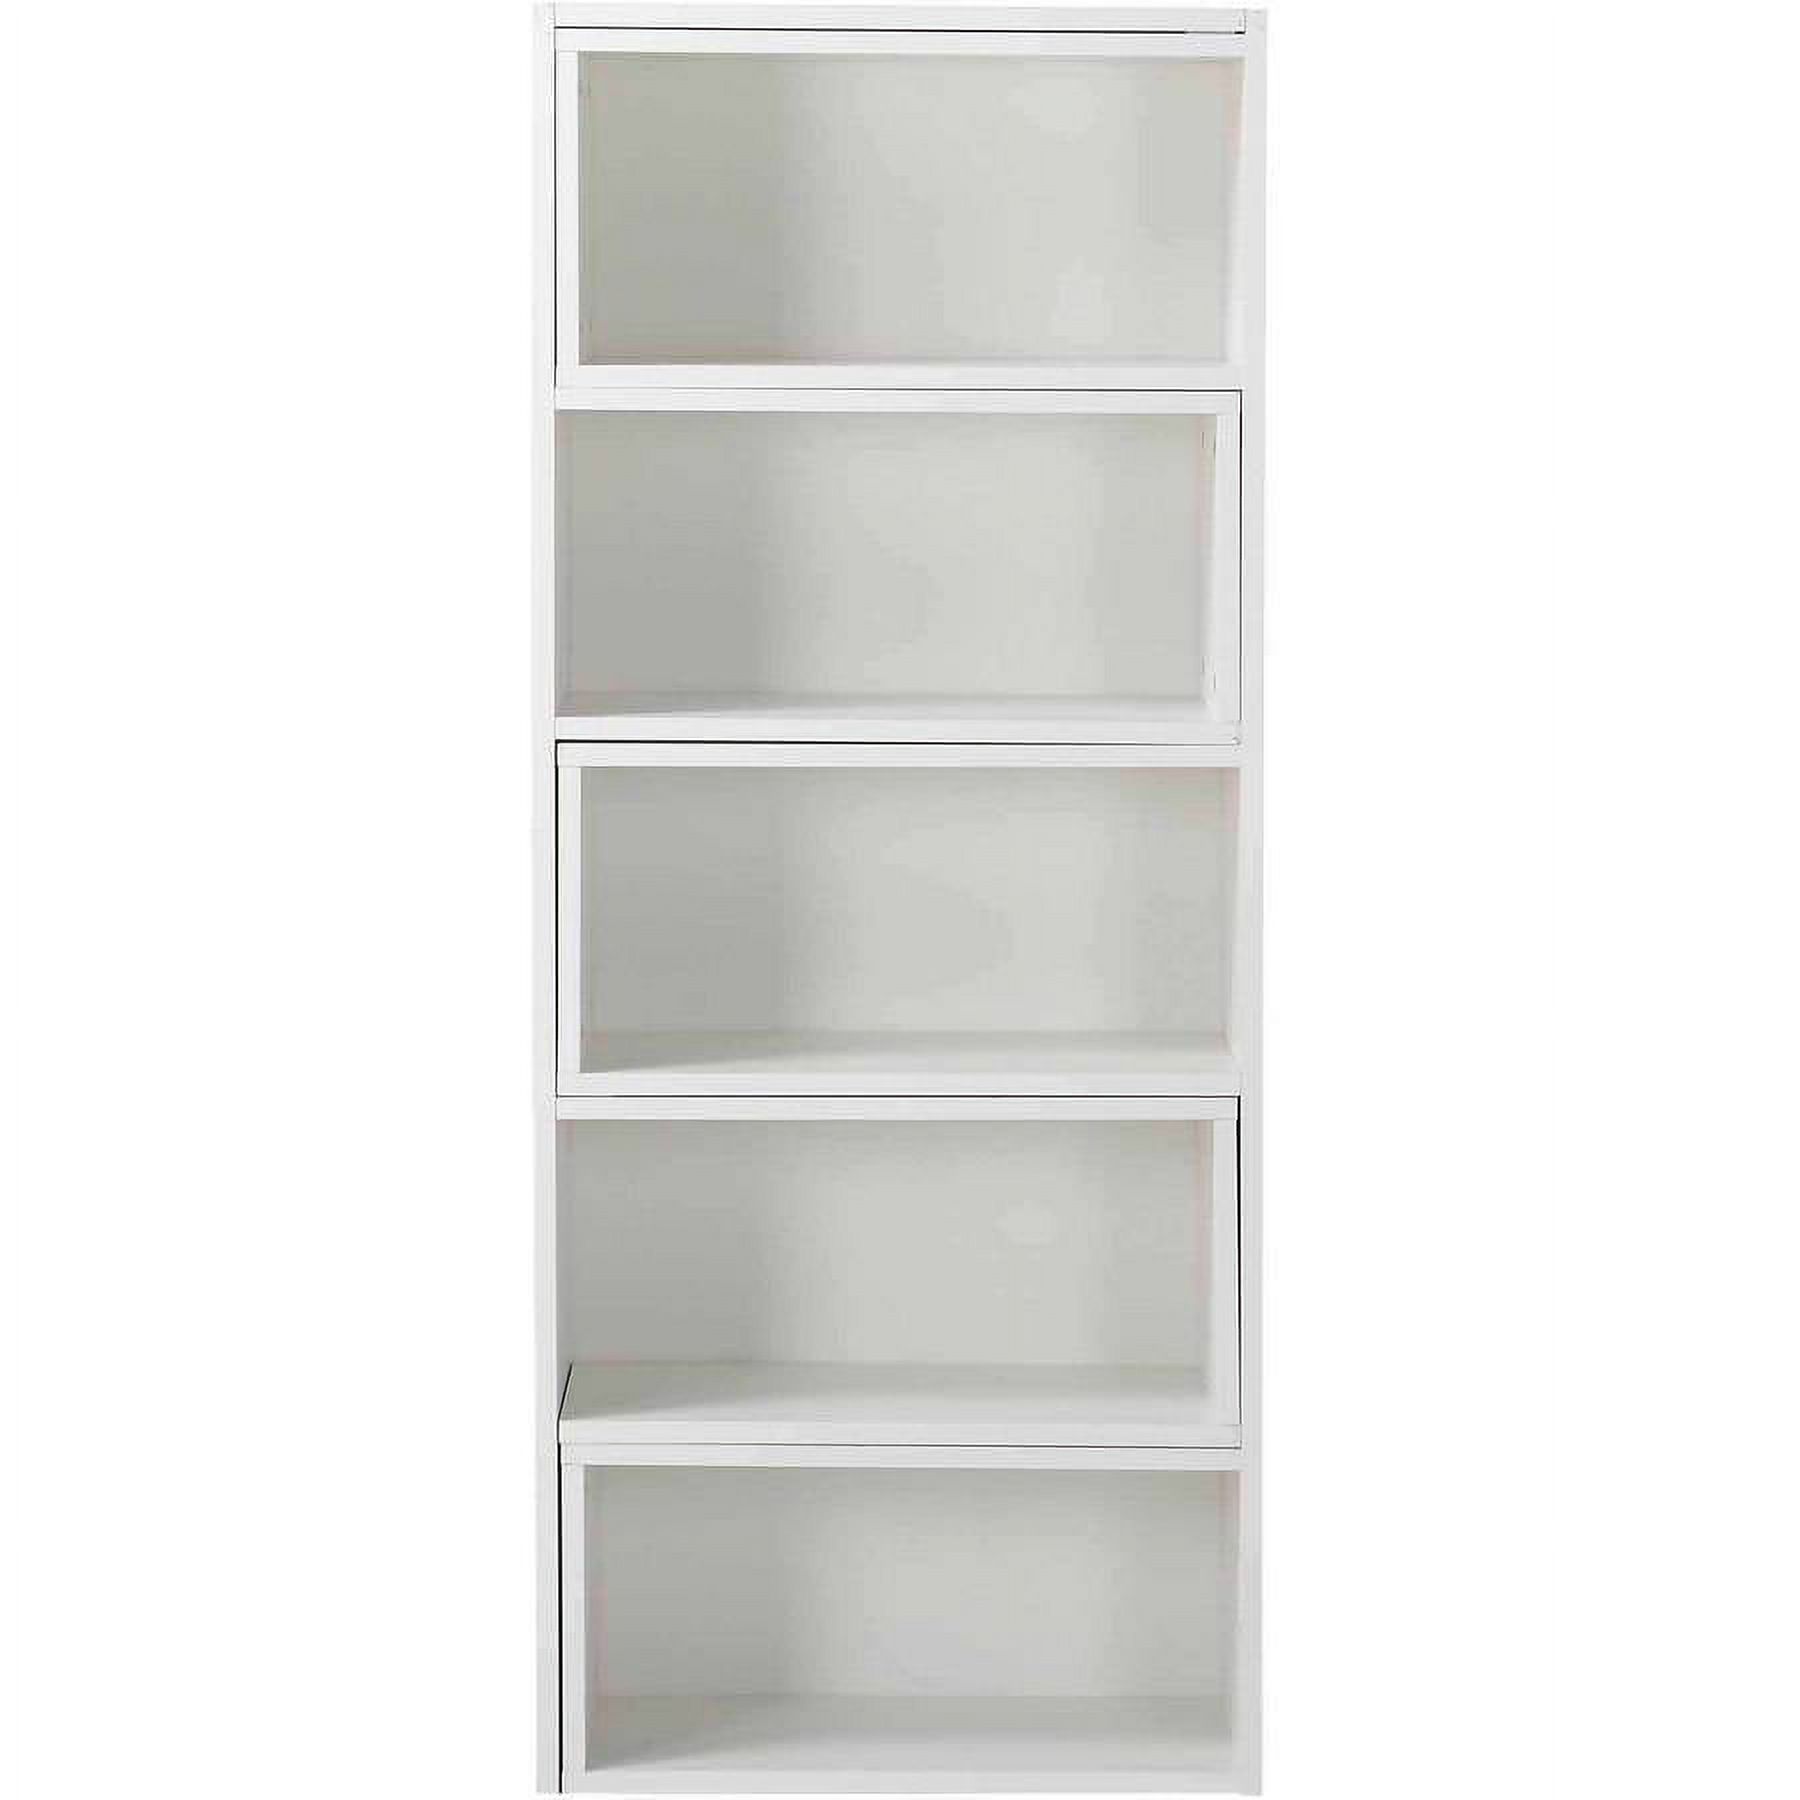 Homestar Flexible and Expandable Shelving Console, White - image 5 of 6